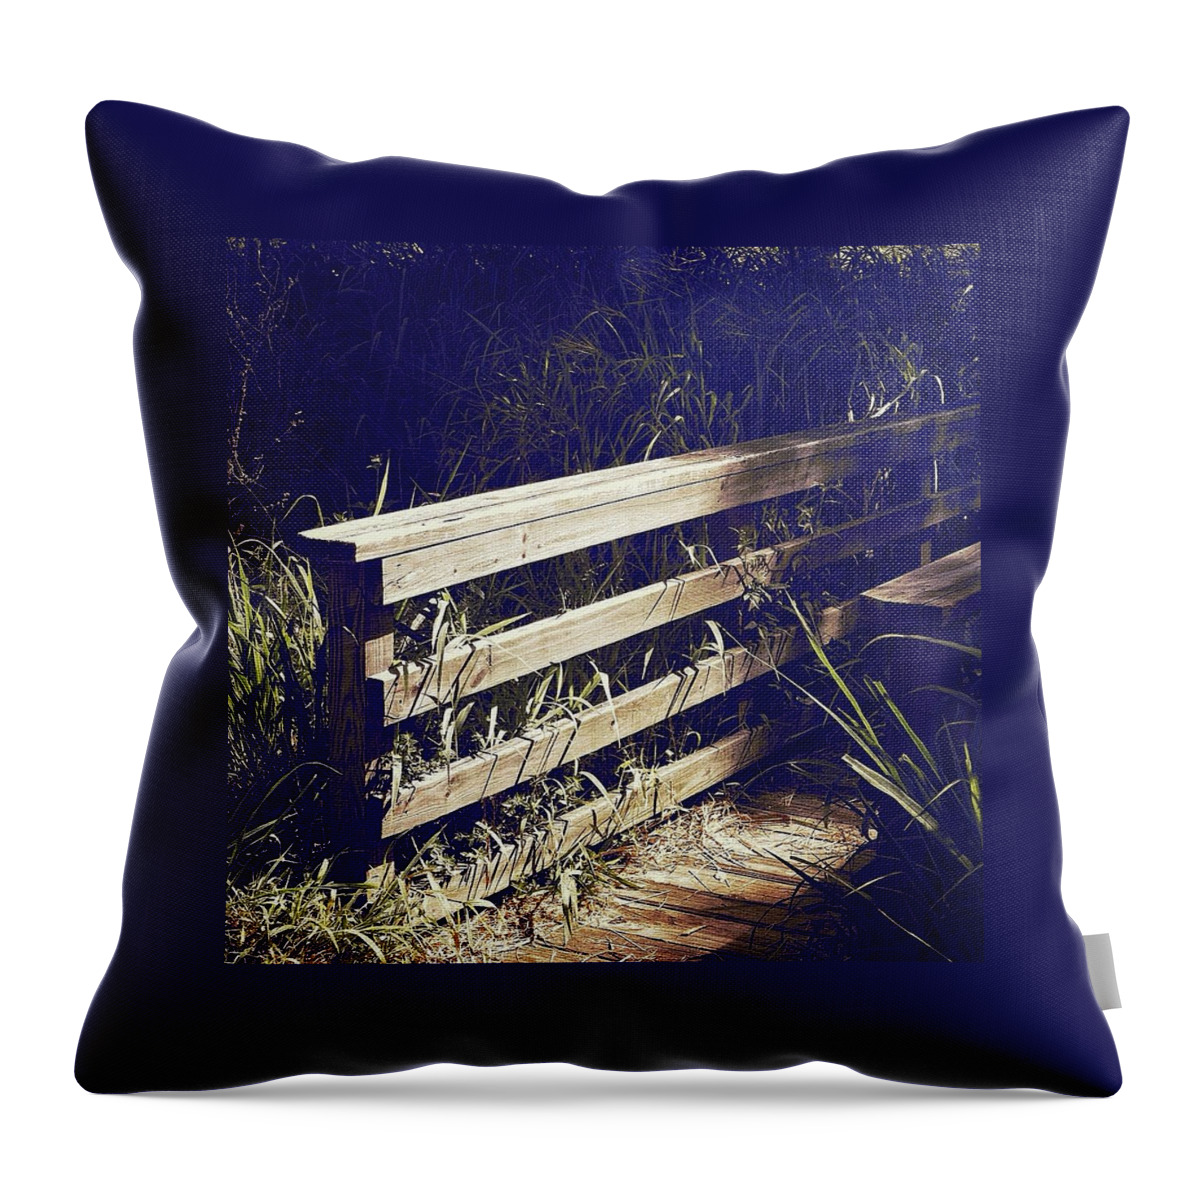 Bridge Throw Pillow featuring the photograph Wooden Bridge by Beth Williams